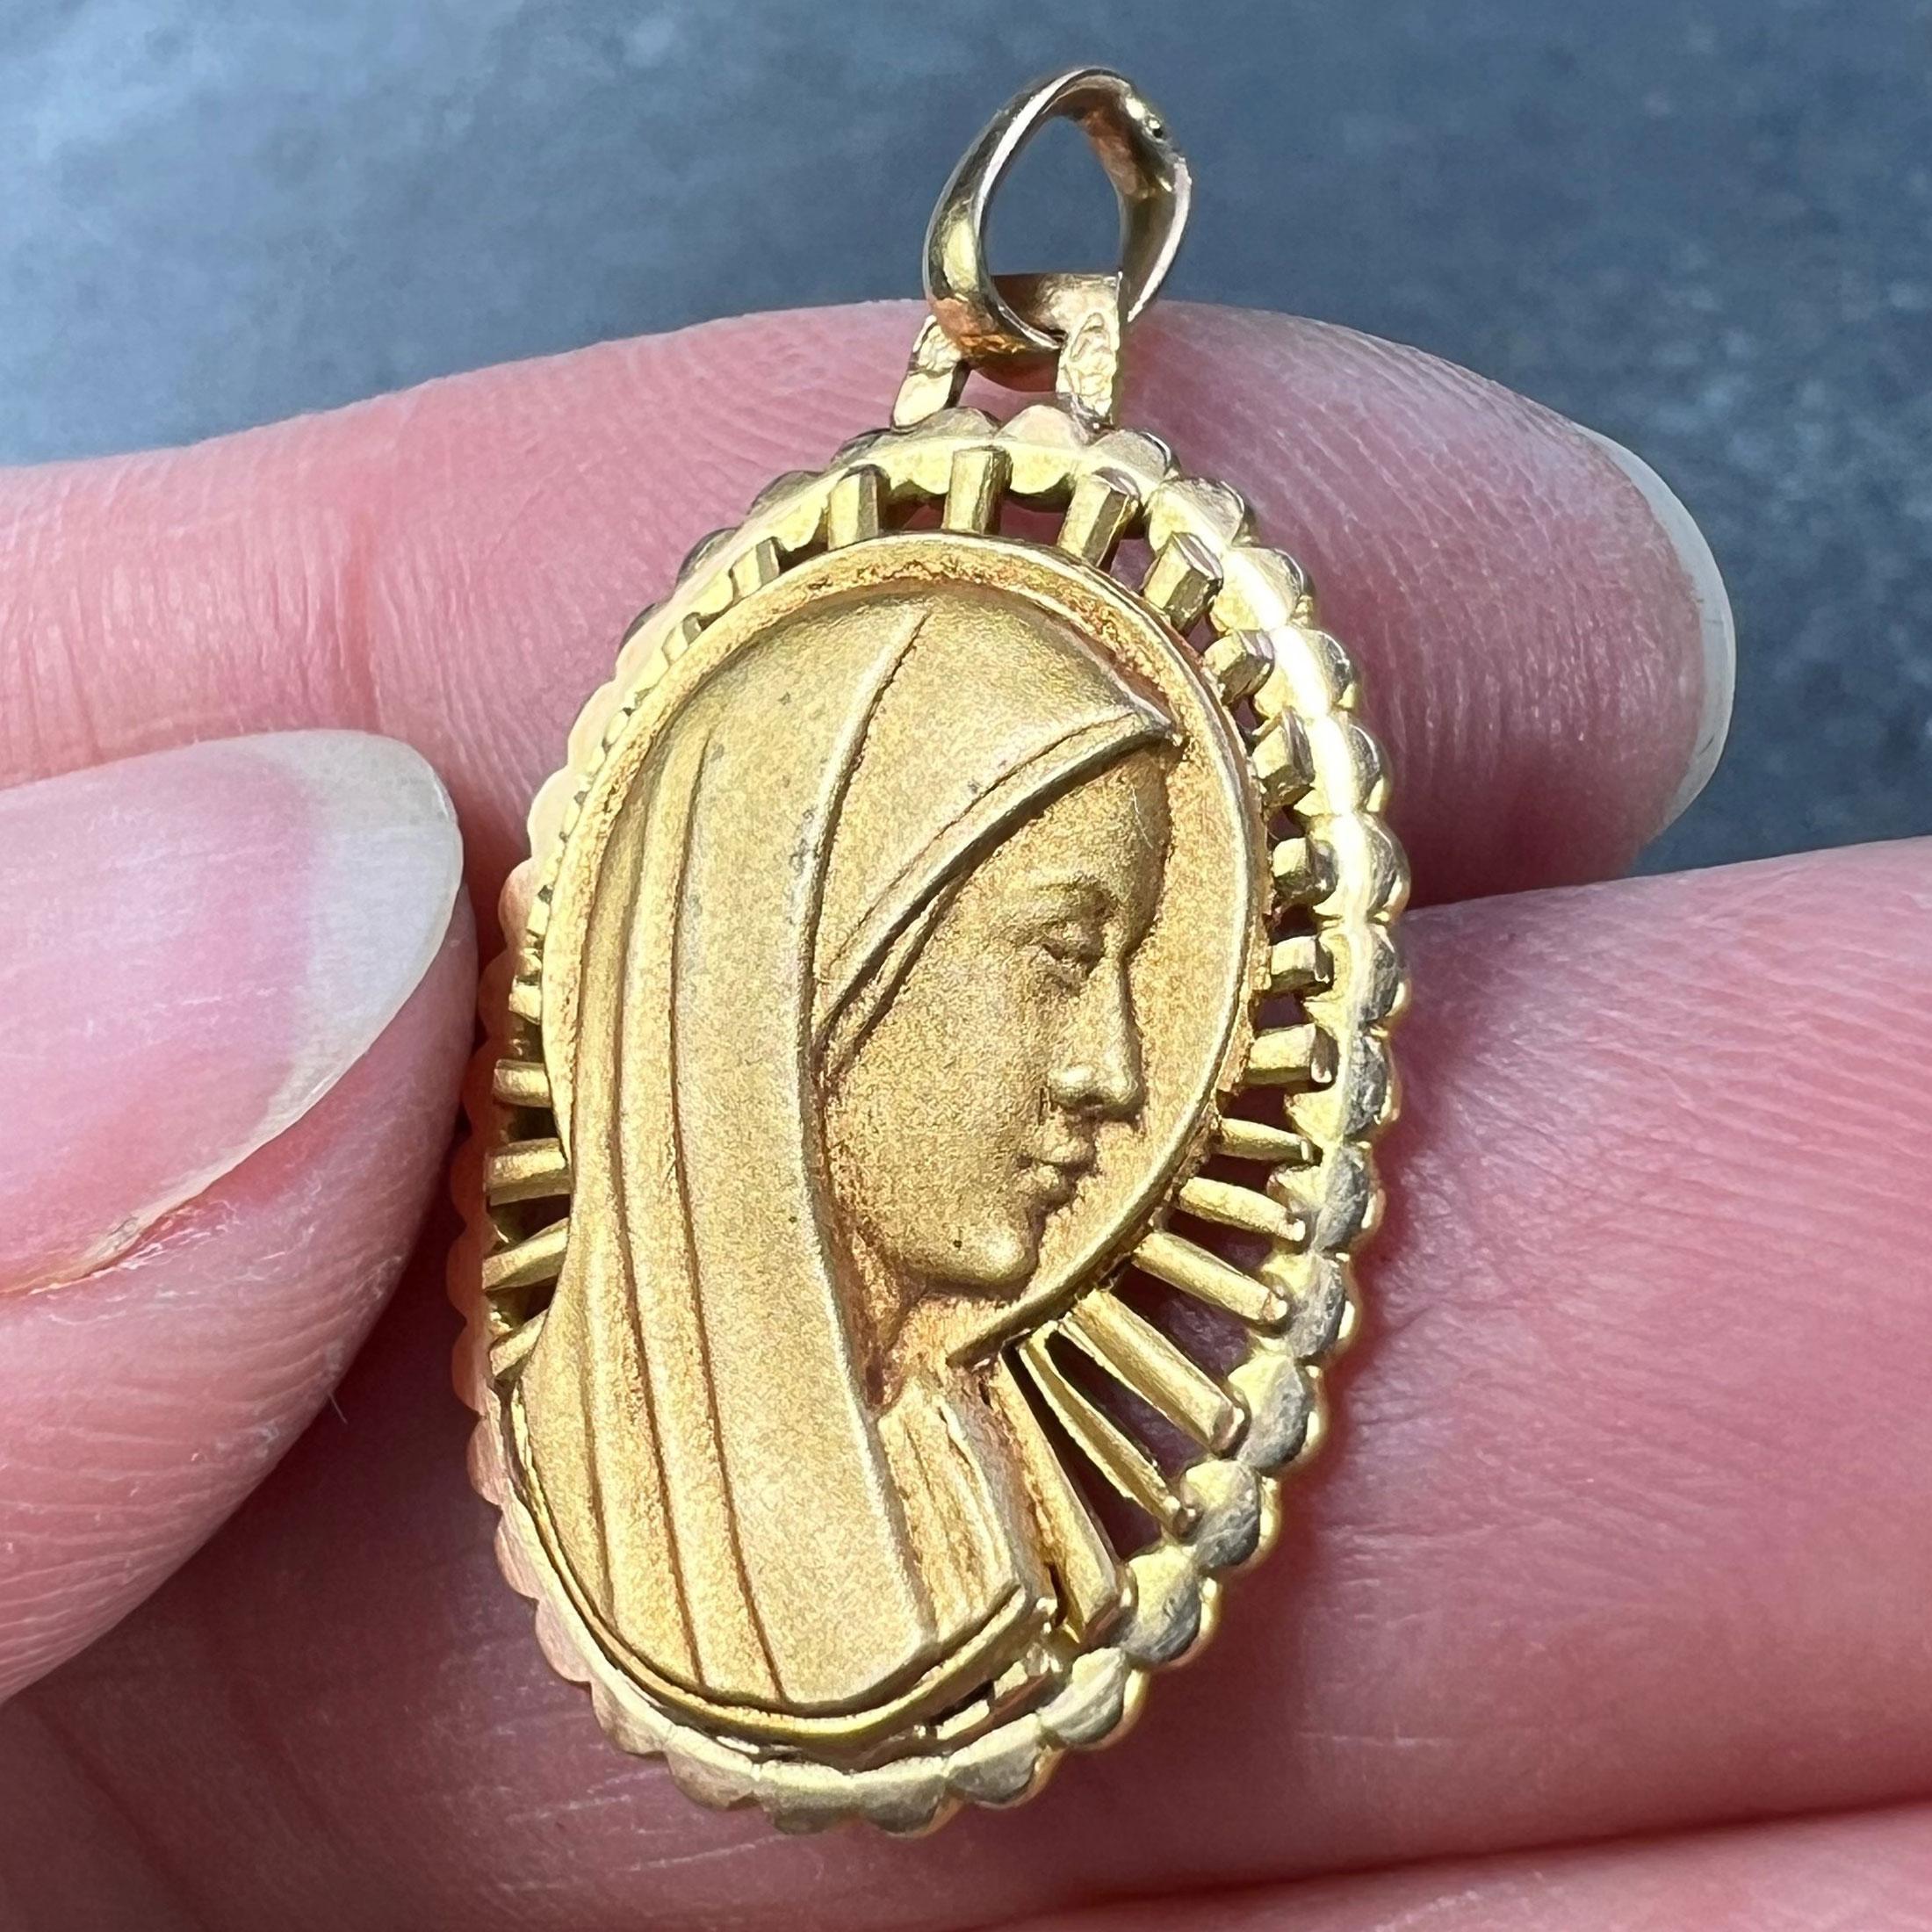 French Virgin Mary 18K Yellow Gold Religious Medal Pendant For Sale 2